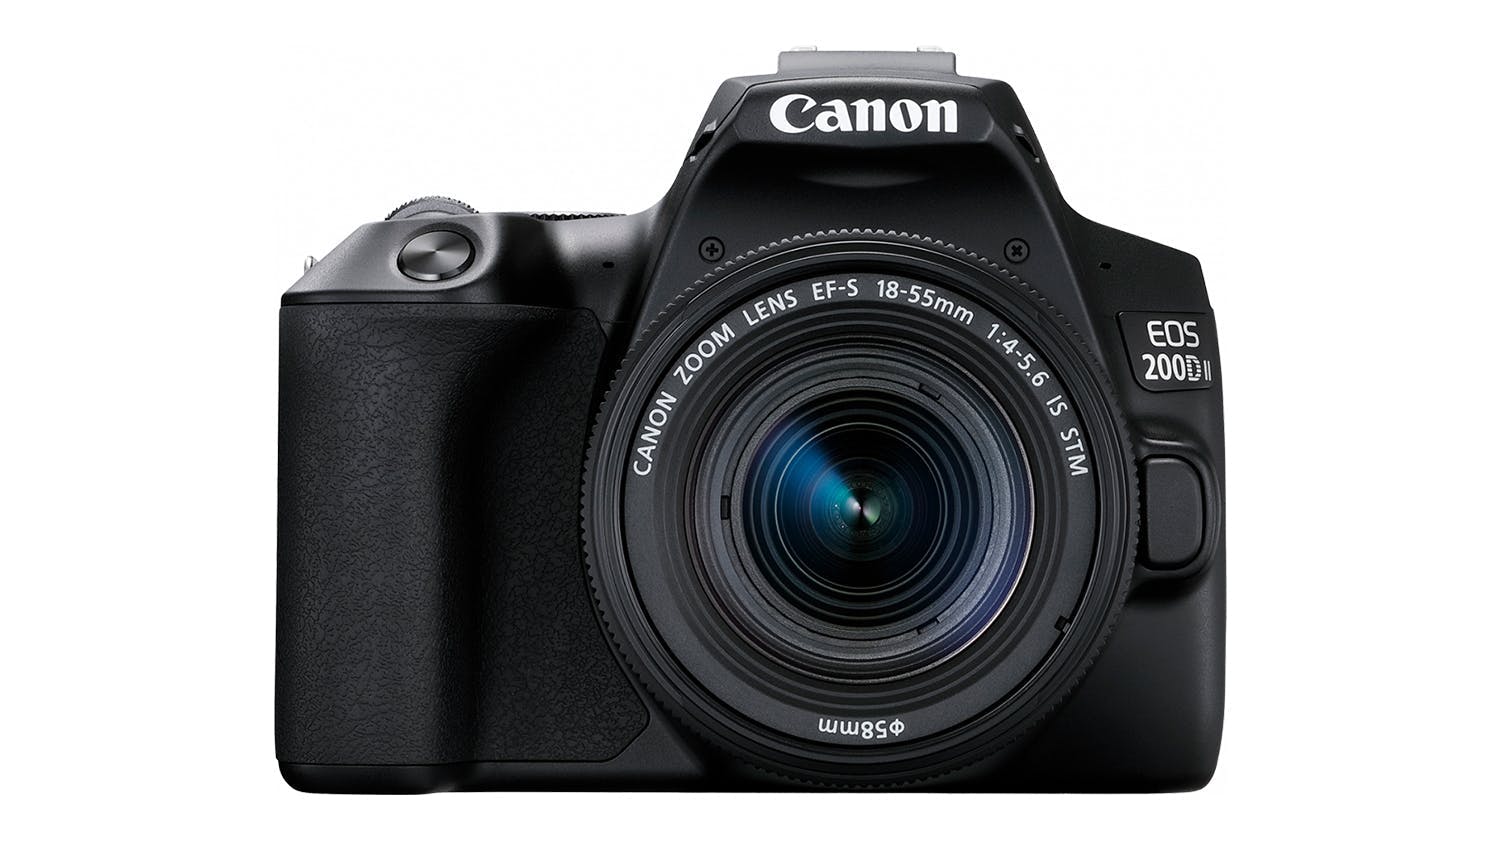 Canon EOS 200D MKII DSLR with 18-55mm Lens